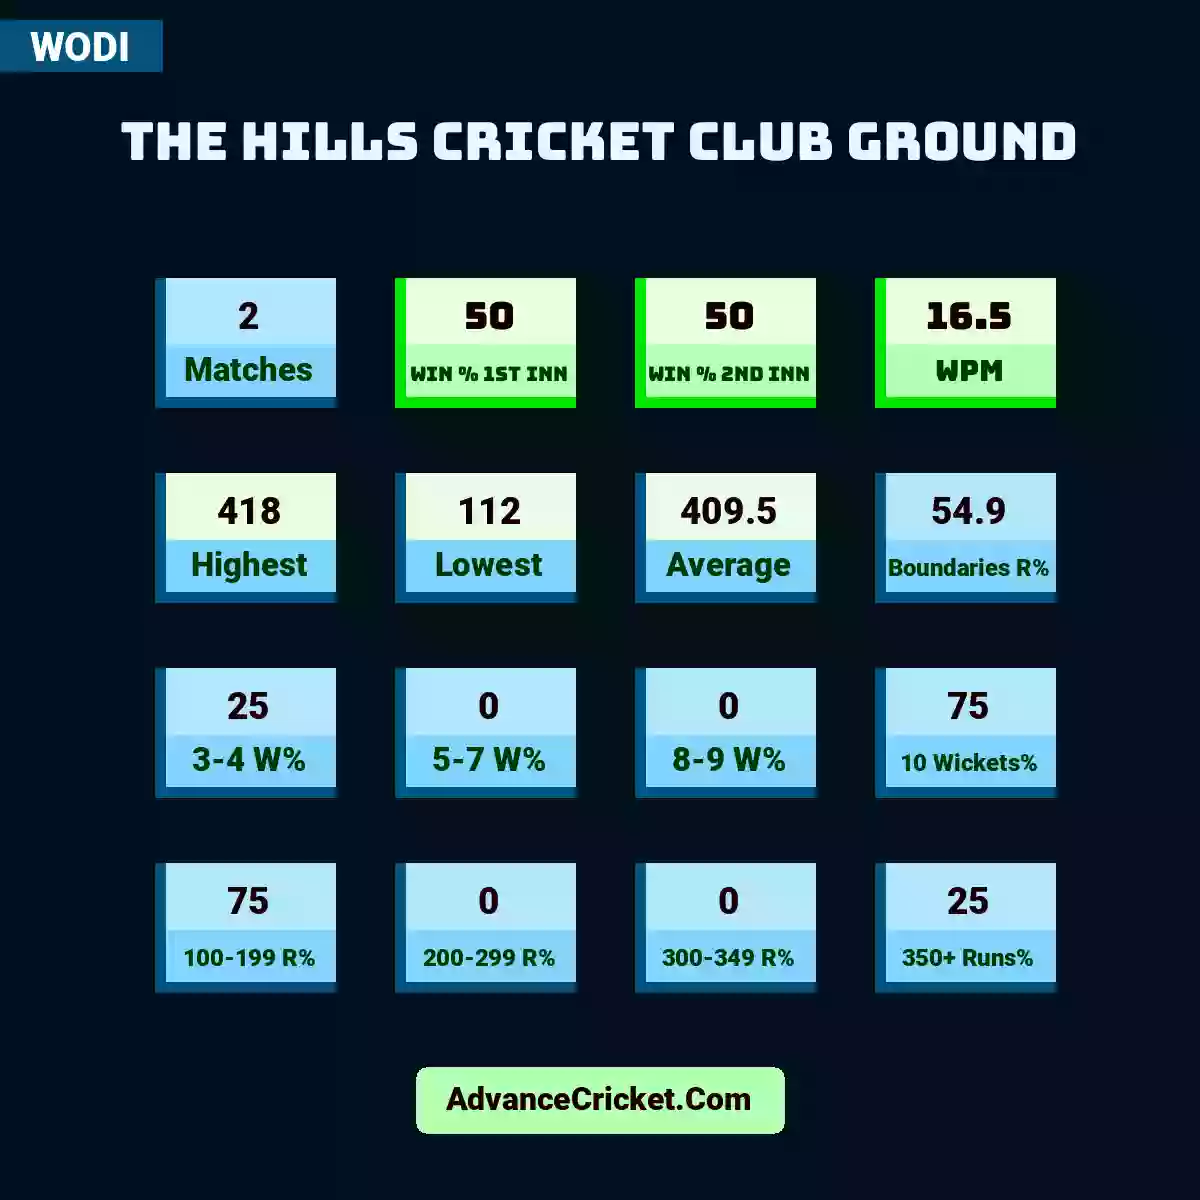 Image showing The Hills Cricket Club Ground with Matches: 2, Win % 1st Inn: 50, Win % 2nd Inn: 50, WPM: 16.5, Highest: 418, Lowest: 112, Average: 409.5, Boundaries R%: 54.9, 3-4 W%: 25, 5-7 W%: 0, 8-9 W%: 0, 10 Wickets%: 75, 100-199 R%: 75, 200-299 R%: 0, 300-349 R%: 0, 350+ Runs%: 25.